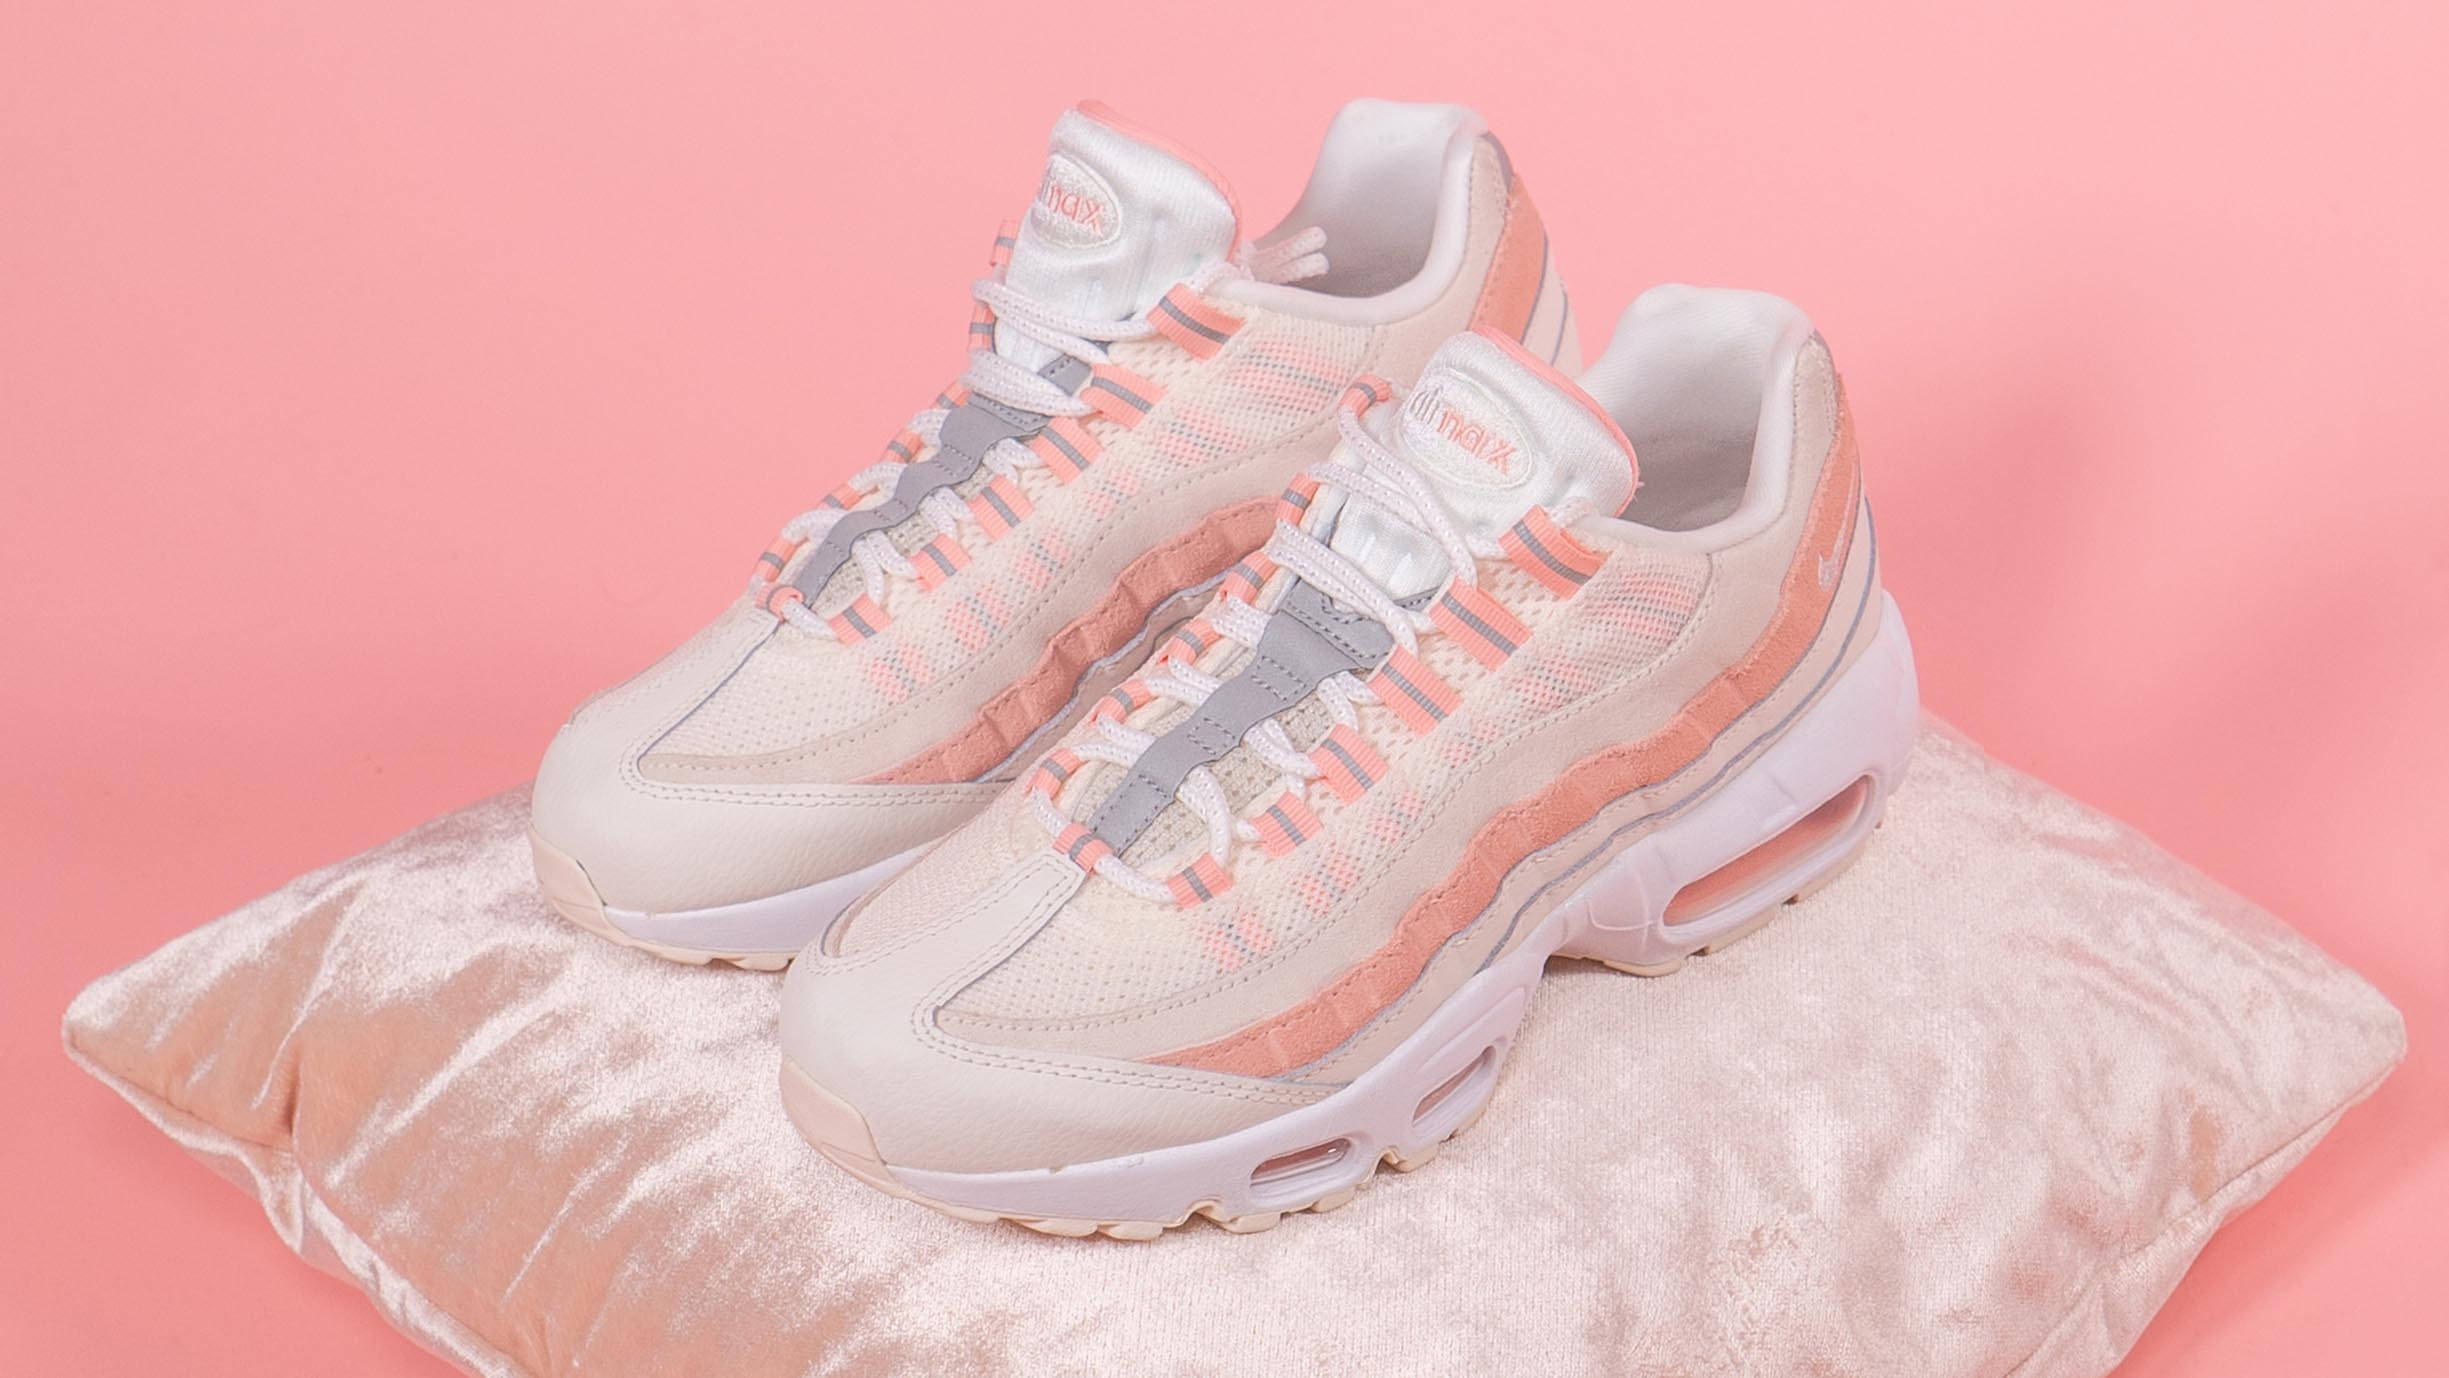 An Exclusive Look At The Nike Air Max 95 Bleached Coral | The Sole